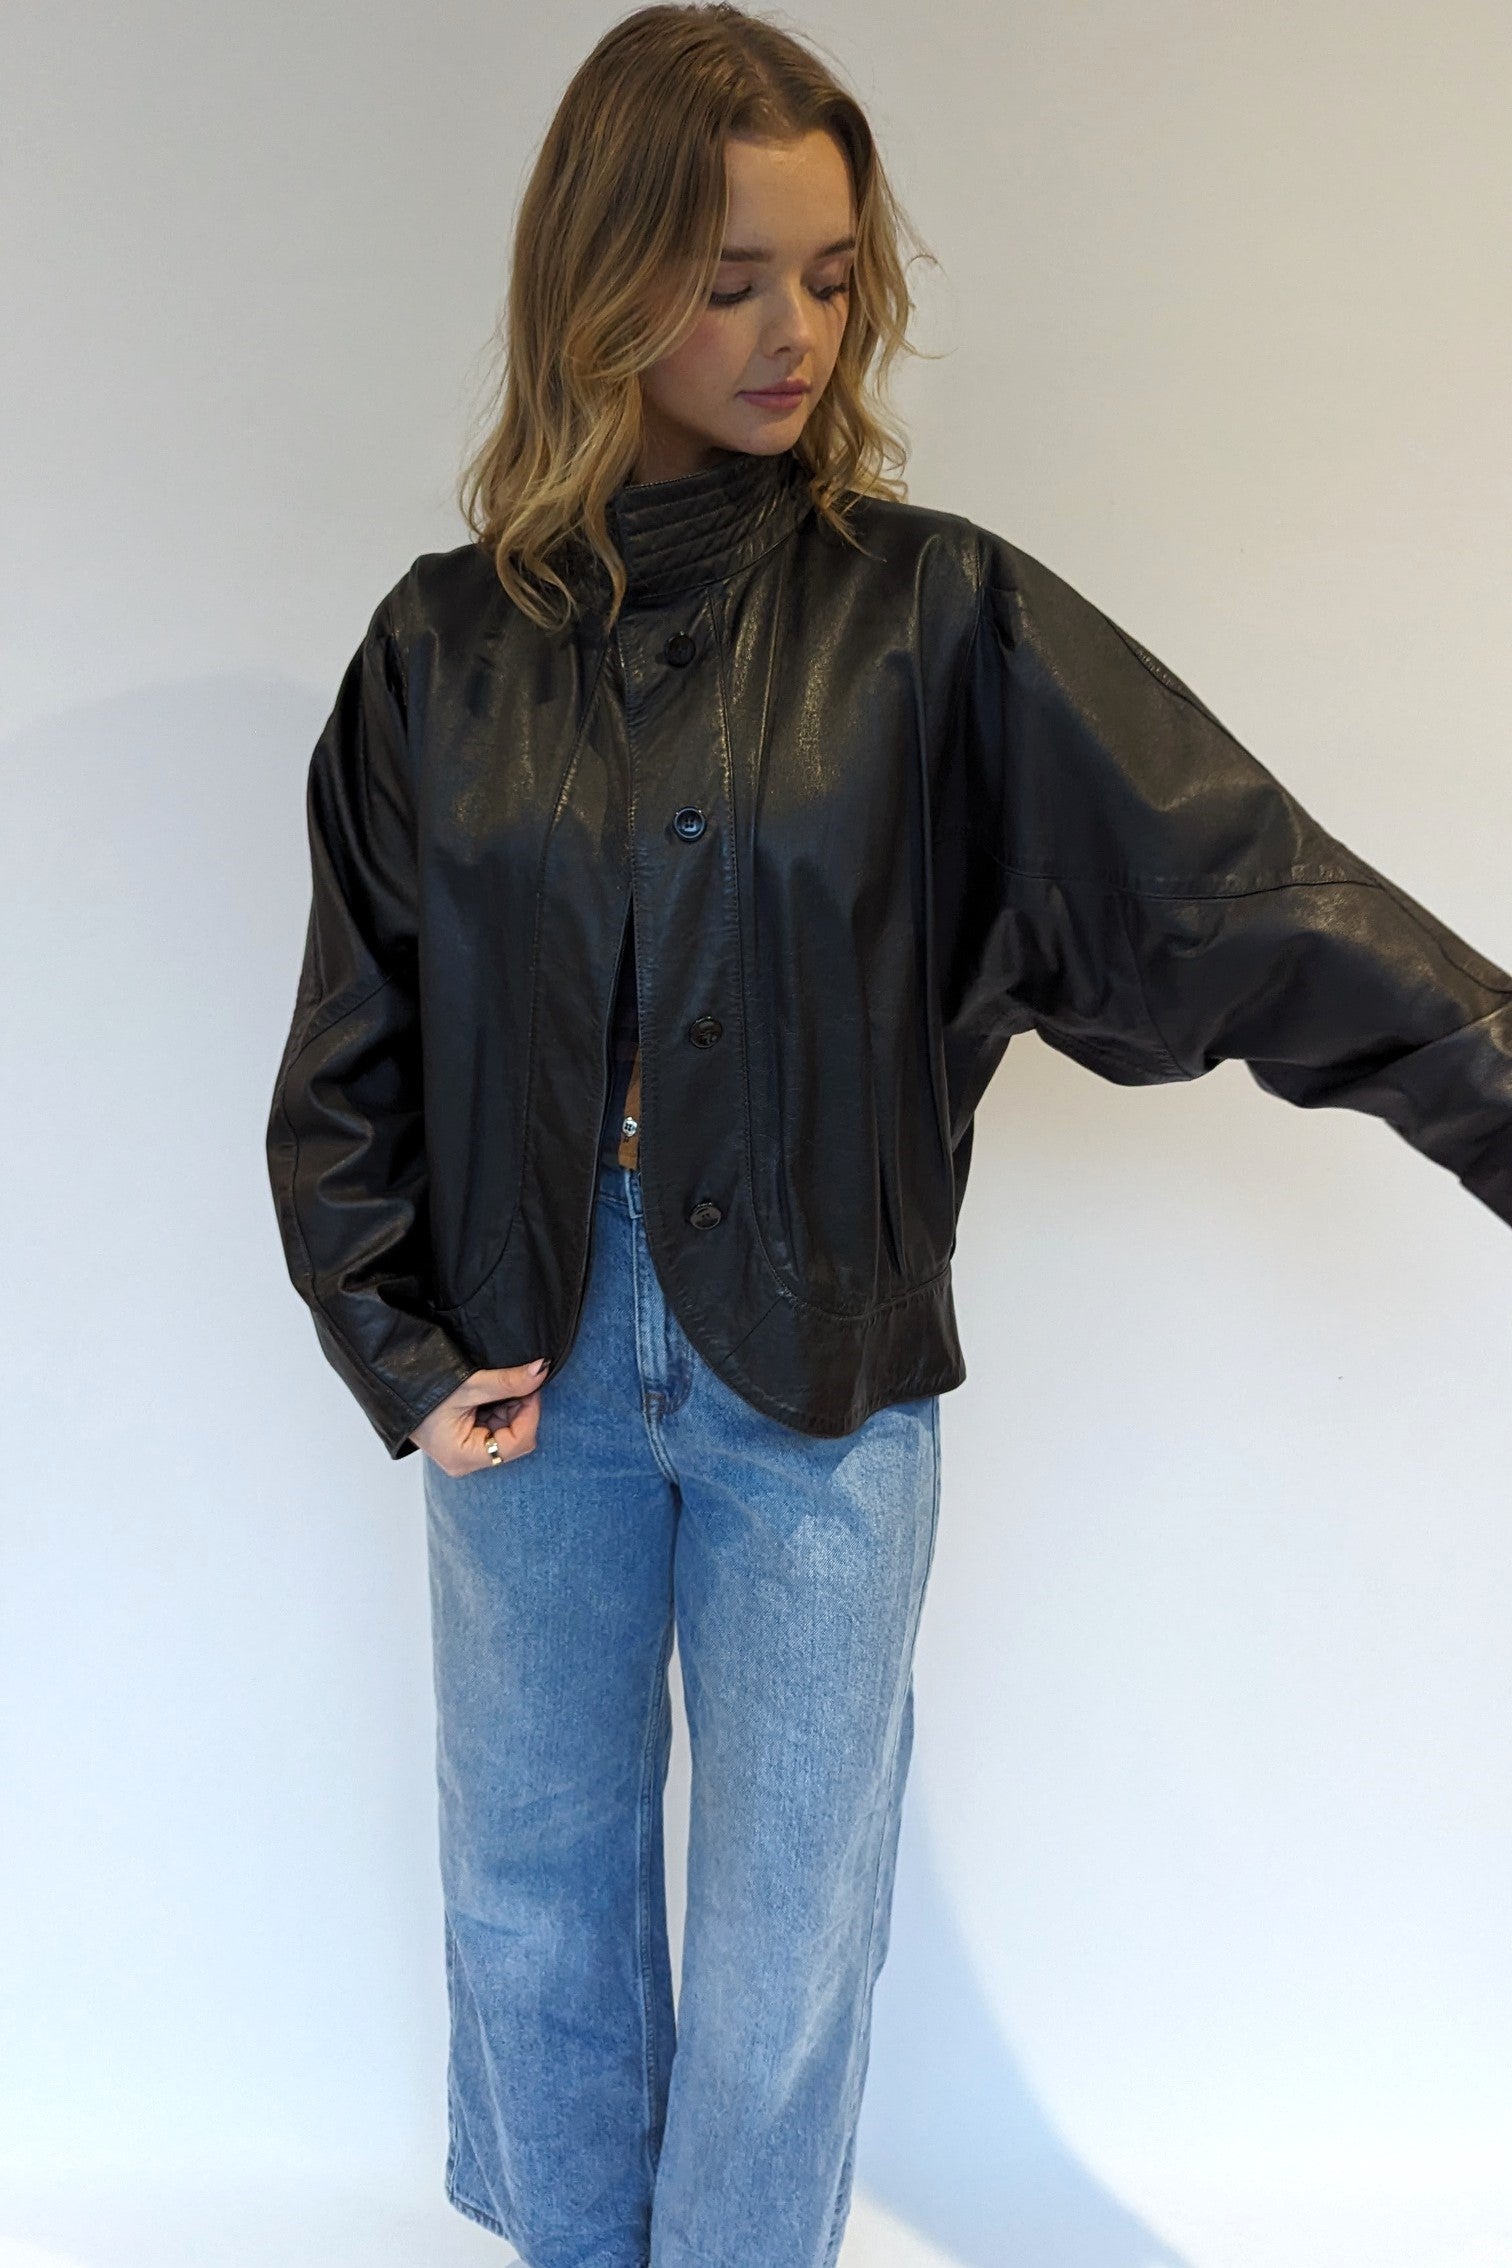 batwing on 80s leather jackt